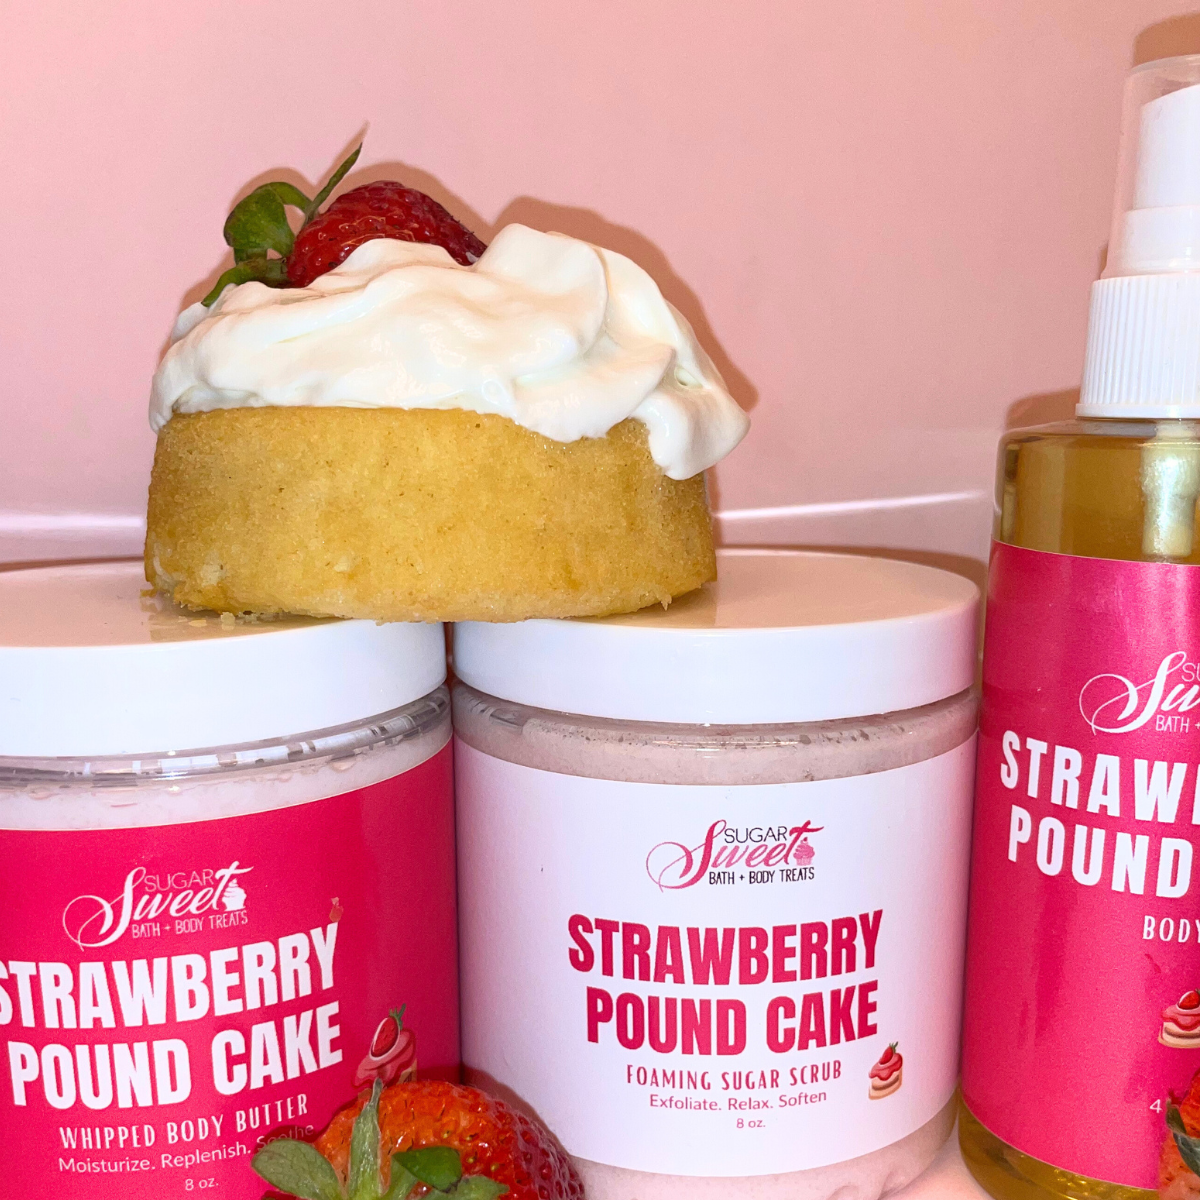 Strawberry Pound Cake Trio Set: Foaming Sugar Scrub, Whipped Body Butter, and Body Oil | Personal Care | Self Care | Gifts for Her | Self Care | Skincare | Fun | #Giftbox